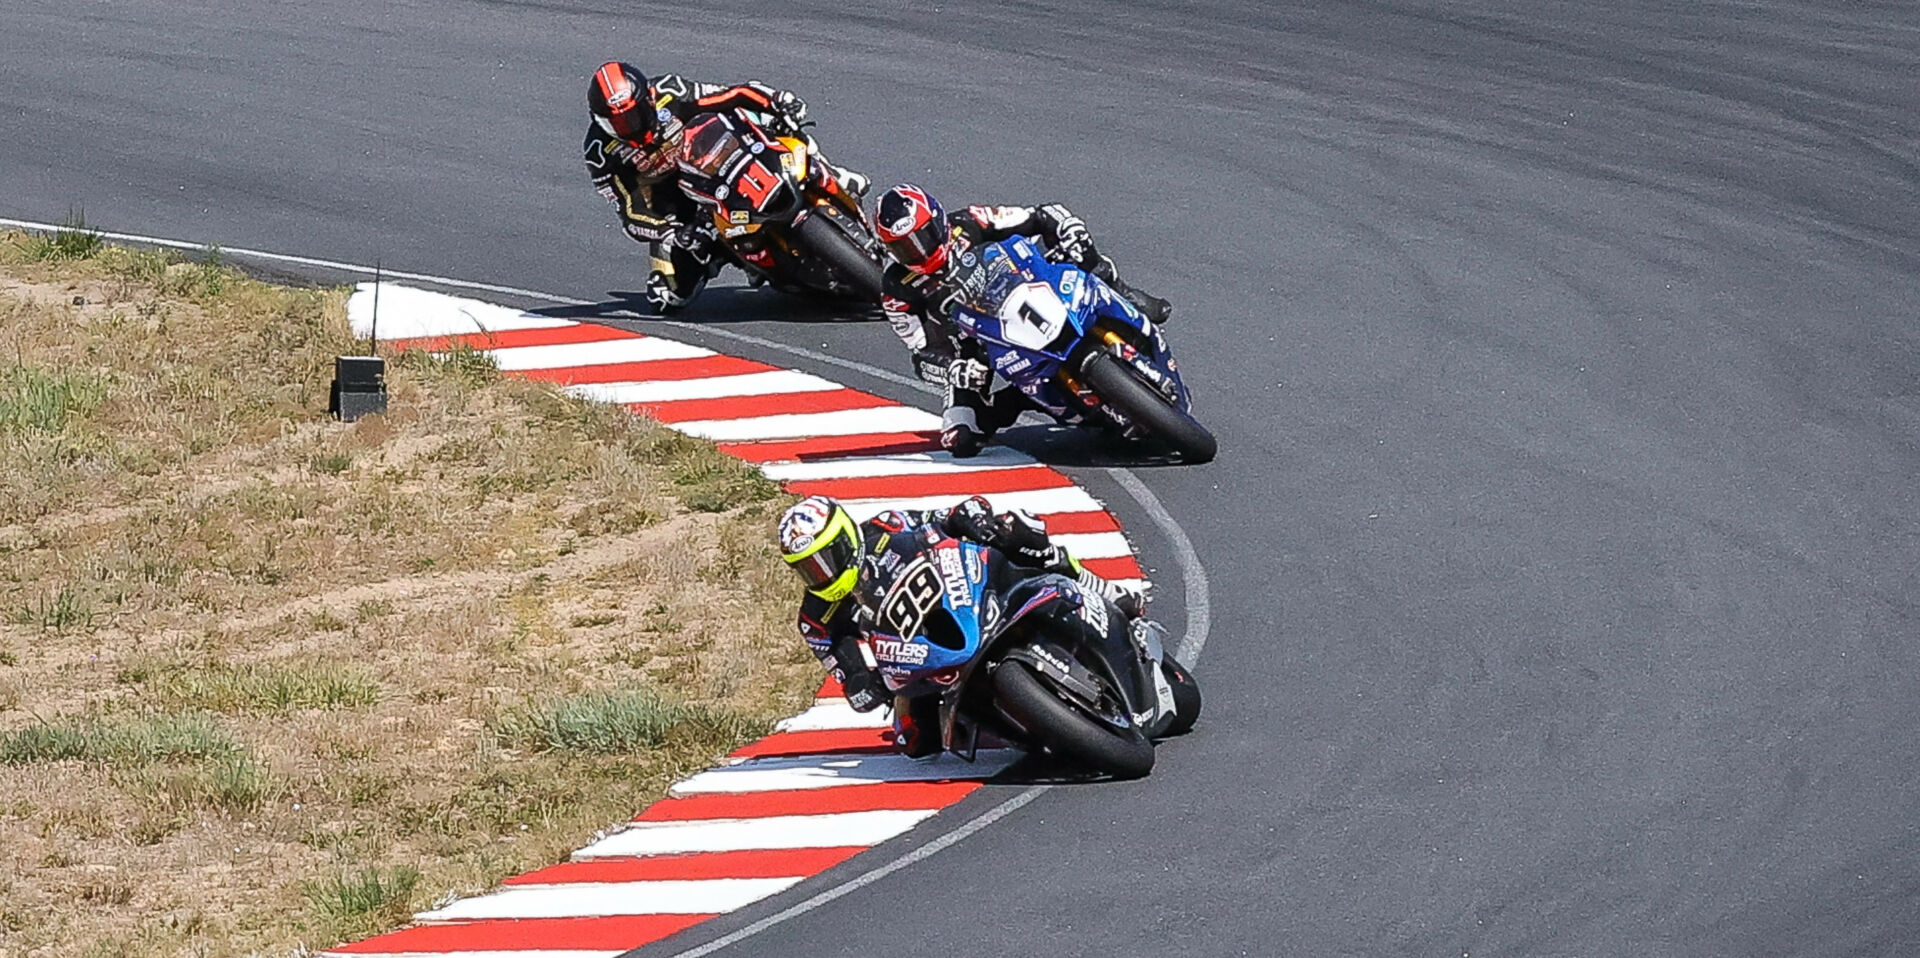 PJ Jacobsen (99) leads Jake Gagne (1) and Mathew Scholtz (11) in Superbike Race Two at Brainerd. Photo by Brian J. Nelson, courtesy Westby Racing.